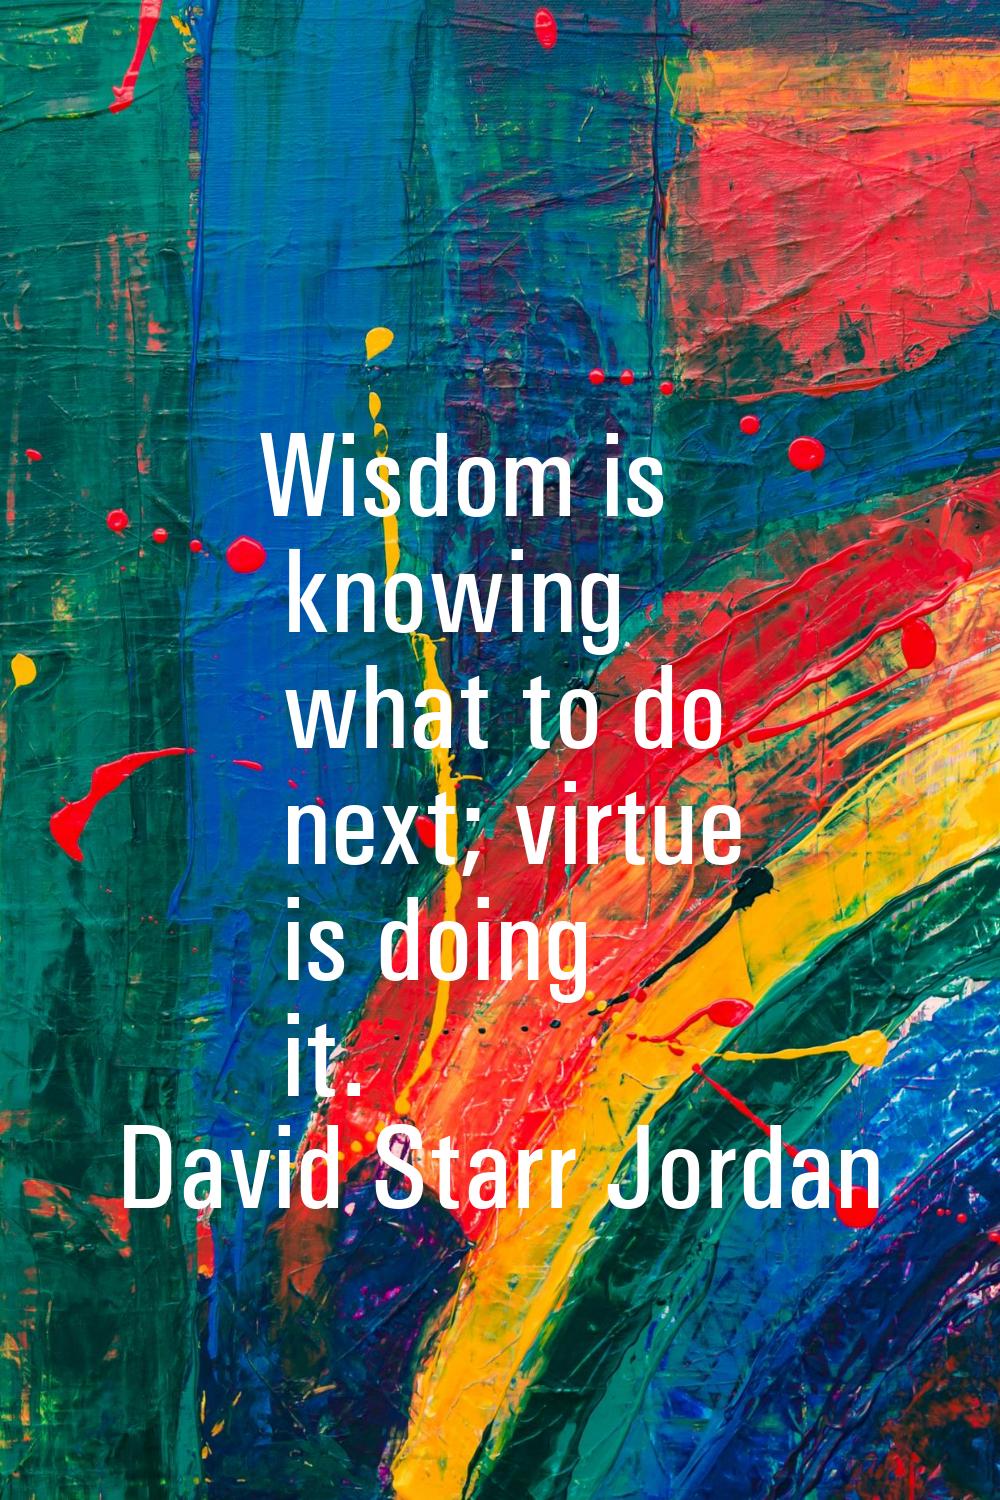 Wisdom is knowing what to do next; virtue is doing it.